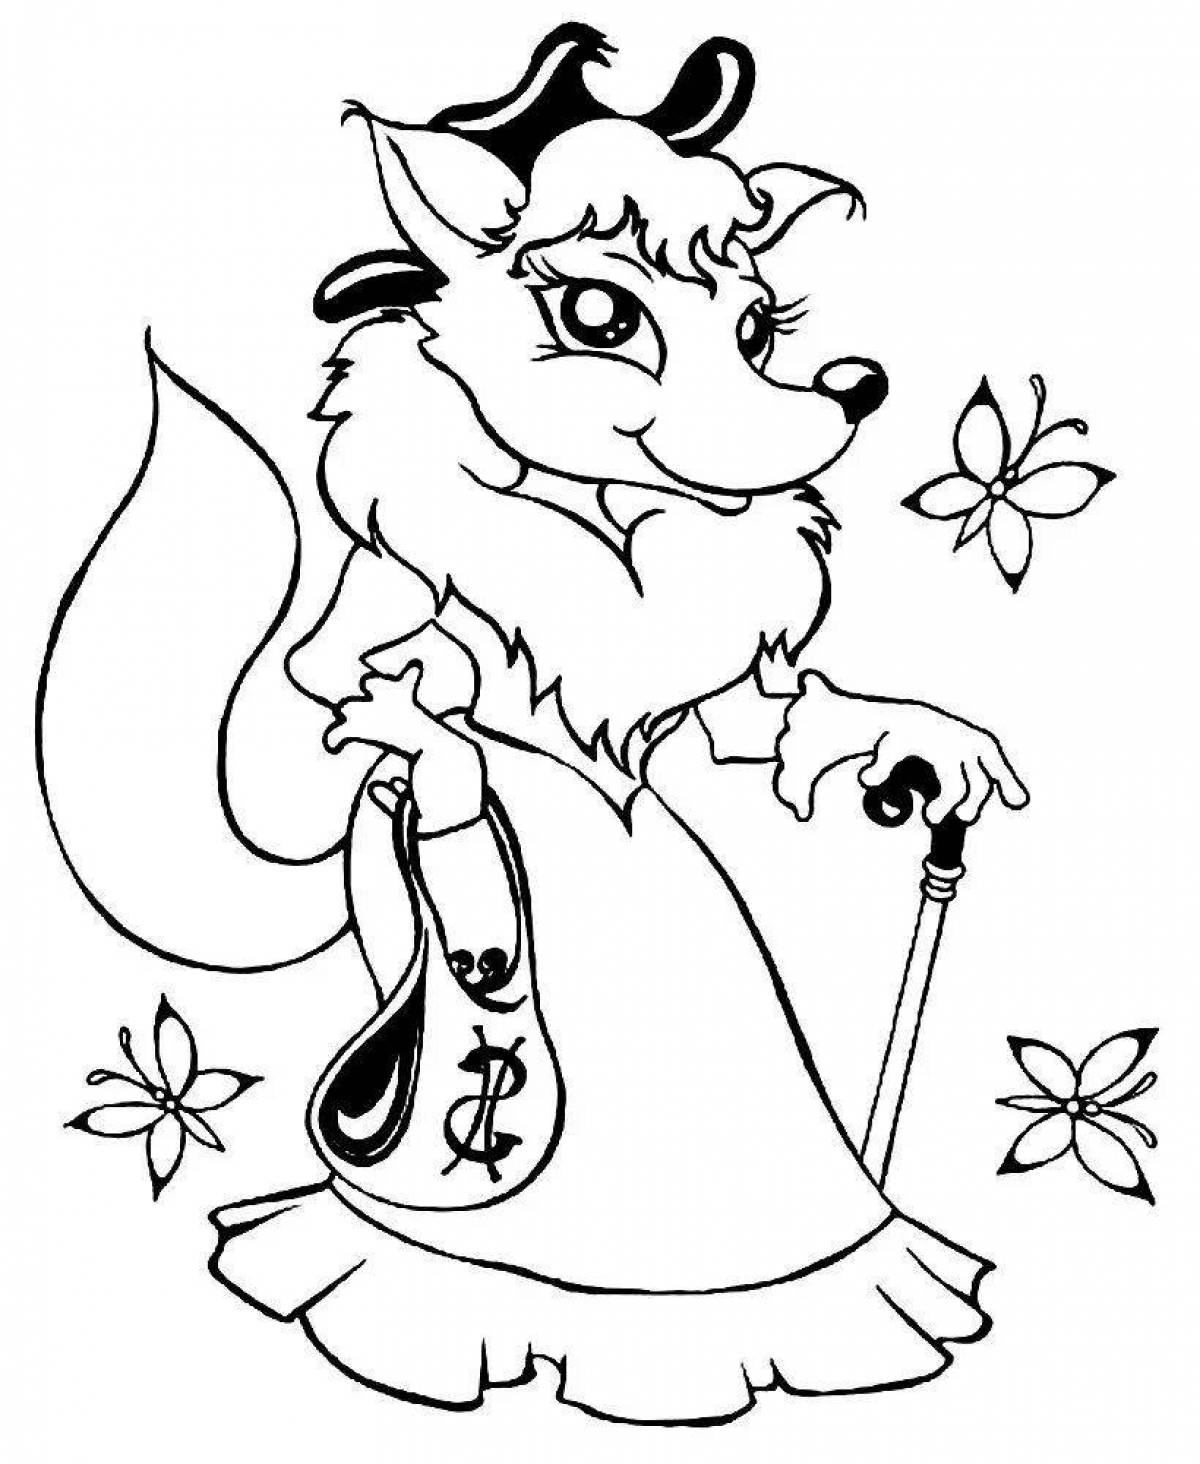 Coloring page energetic cunning fox